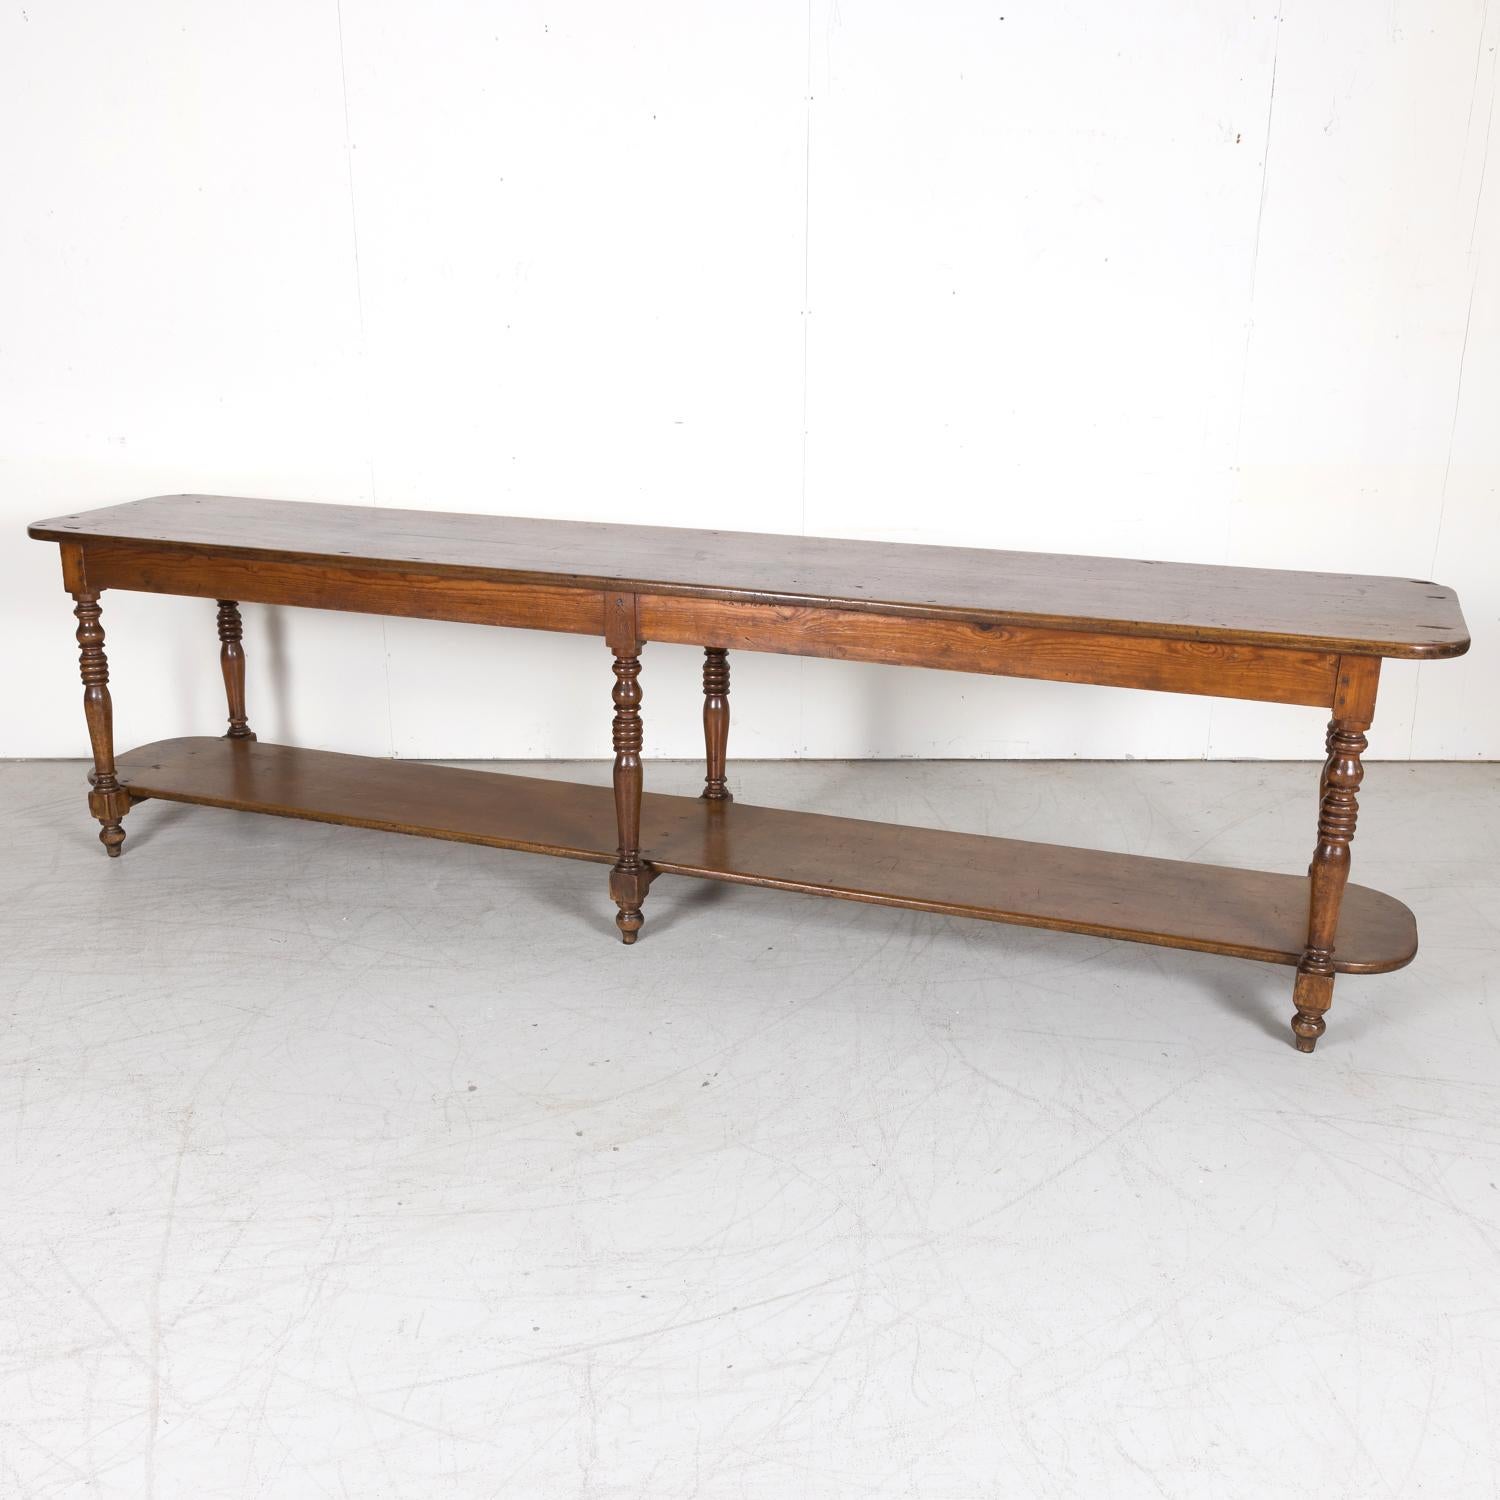 Mid-19th Century Monumental 19th Century French Louis Philippe Period Draper Table